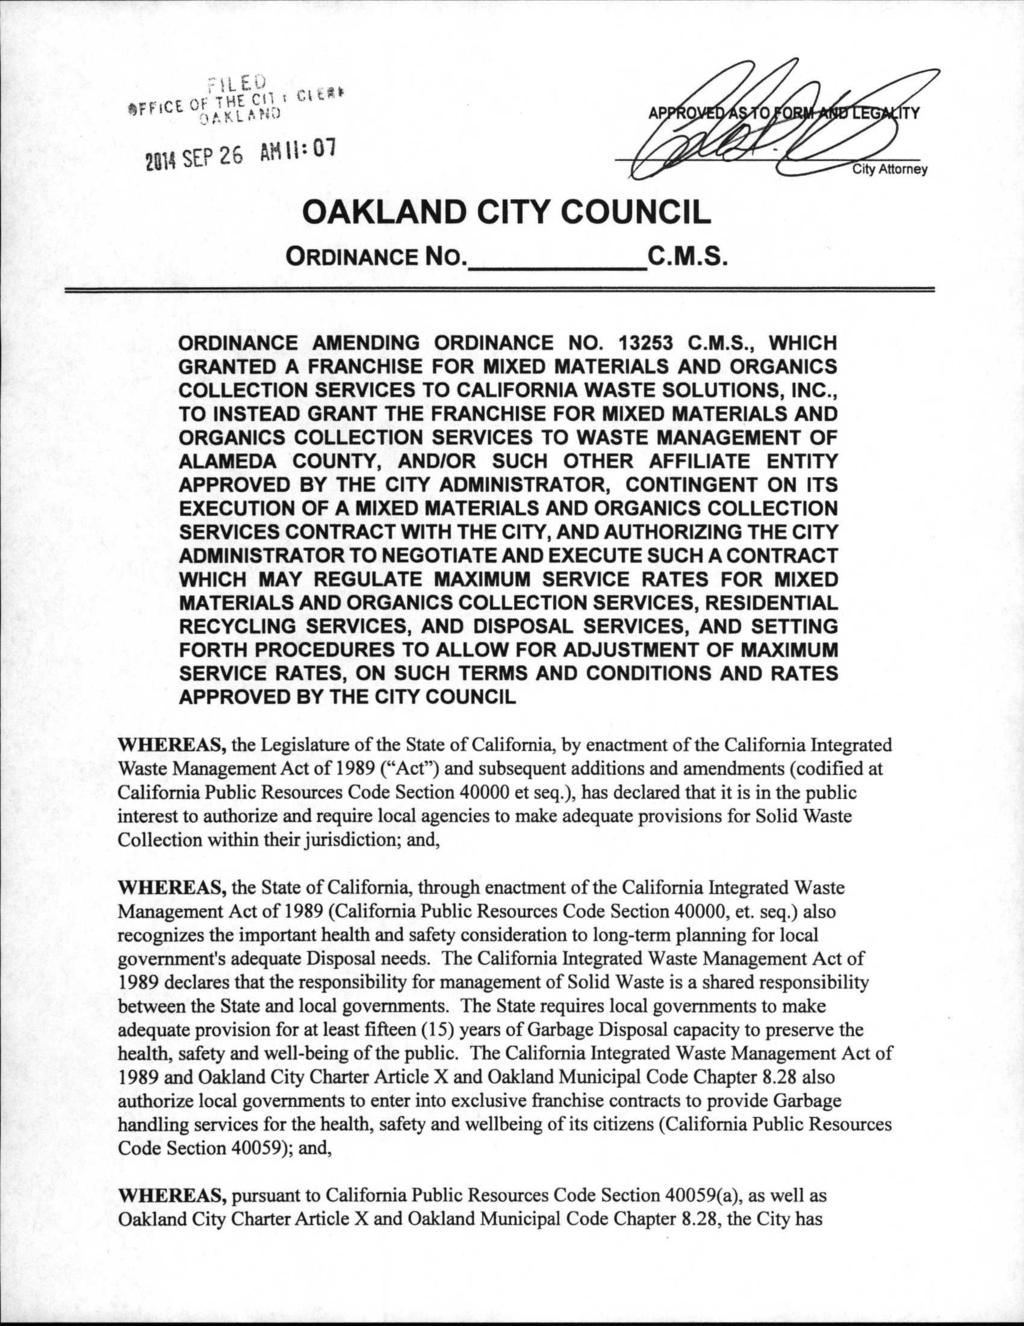 2S14SEP26 AHli--01 OAKLAND CITY COUNCIL ORDINANCE No. C.M.S. ity Attorney ORDINANCE AMENDING ORDINANCE NO. 13253 C.M.S., WHICH GRANTED A FRANCHISE FOR MIXED MATERIALS AND ORGANICS COLLECTION SERVICES TO CALIFORNIA WASTE SOLUTIONS, INC.